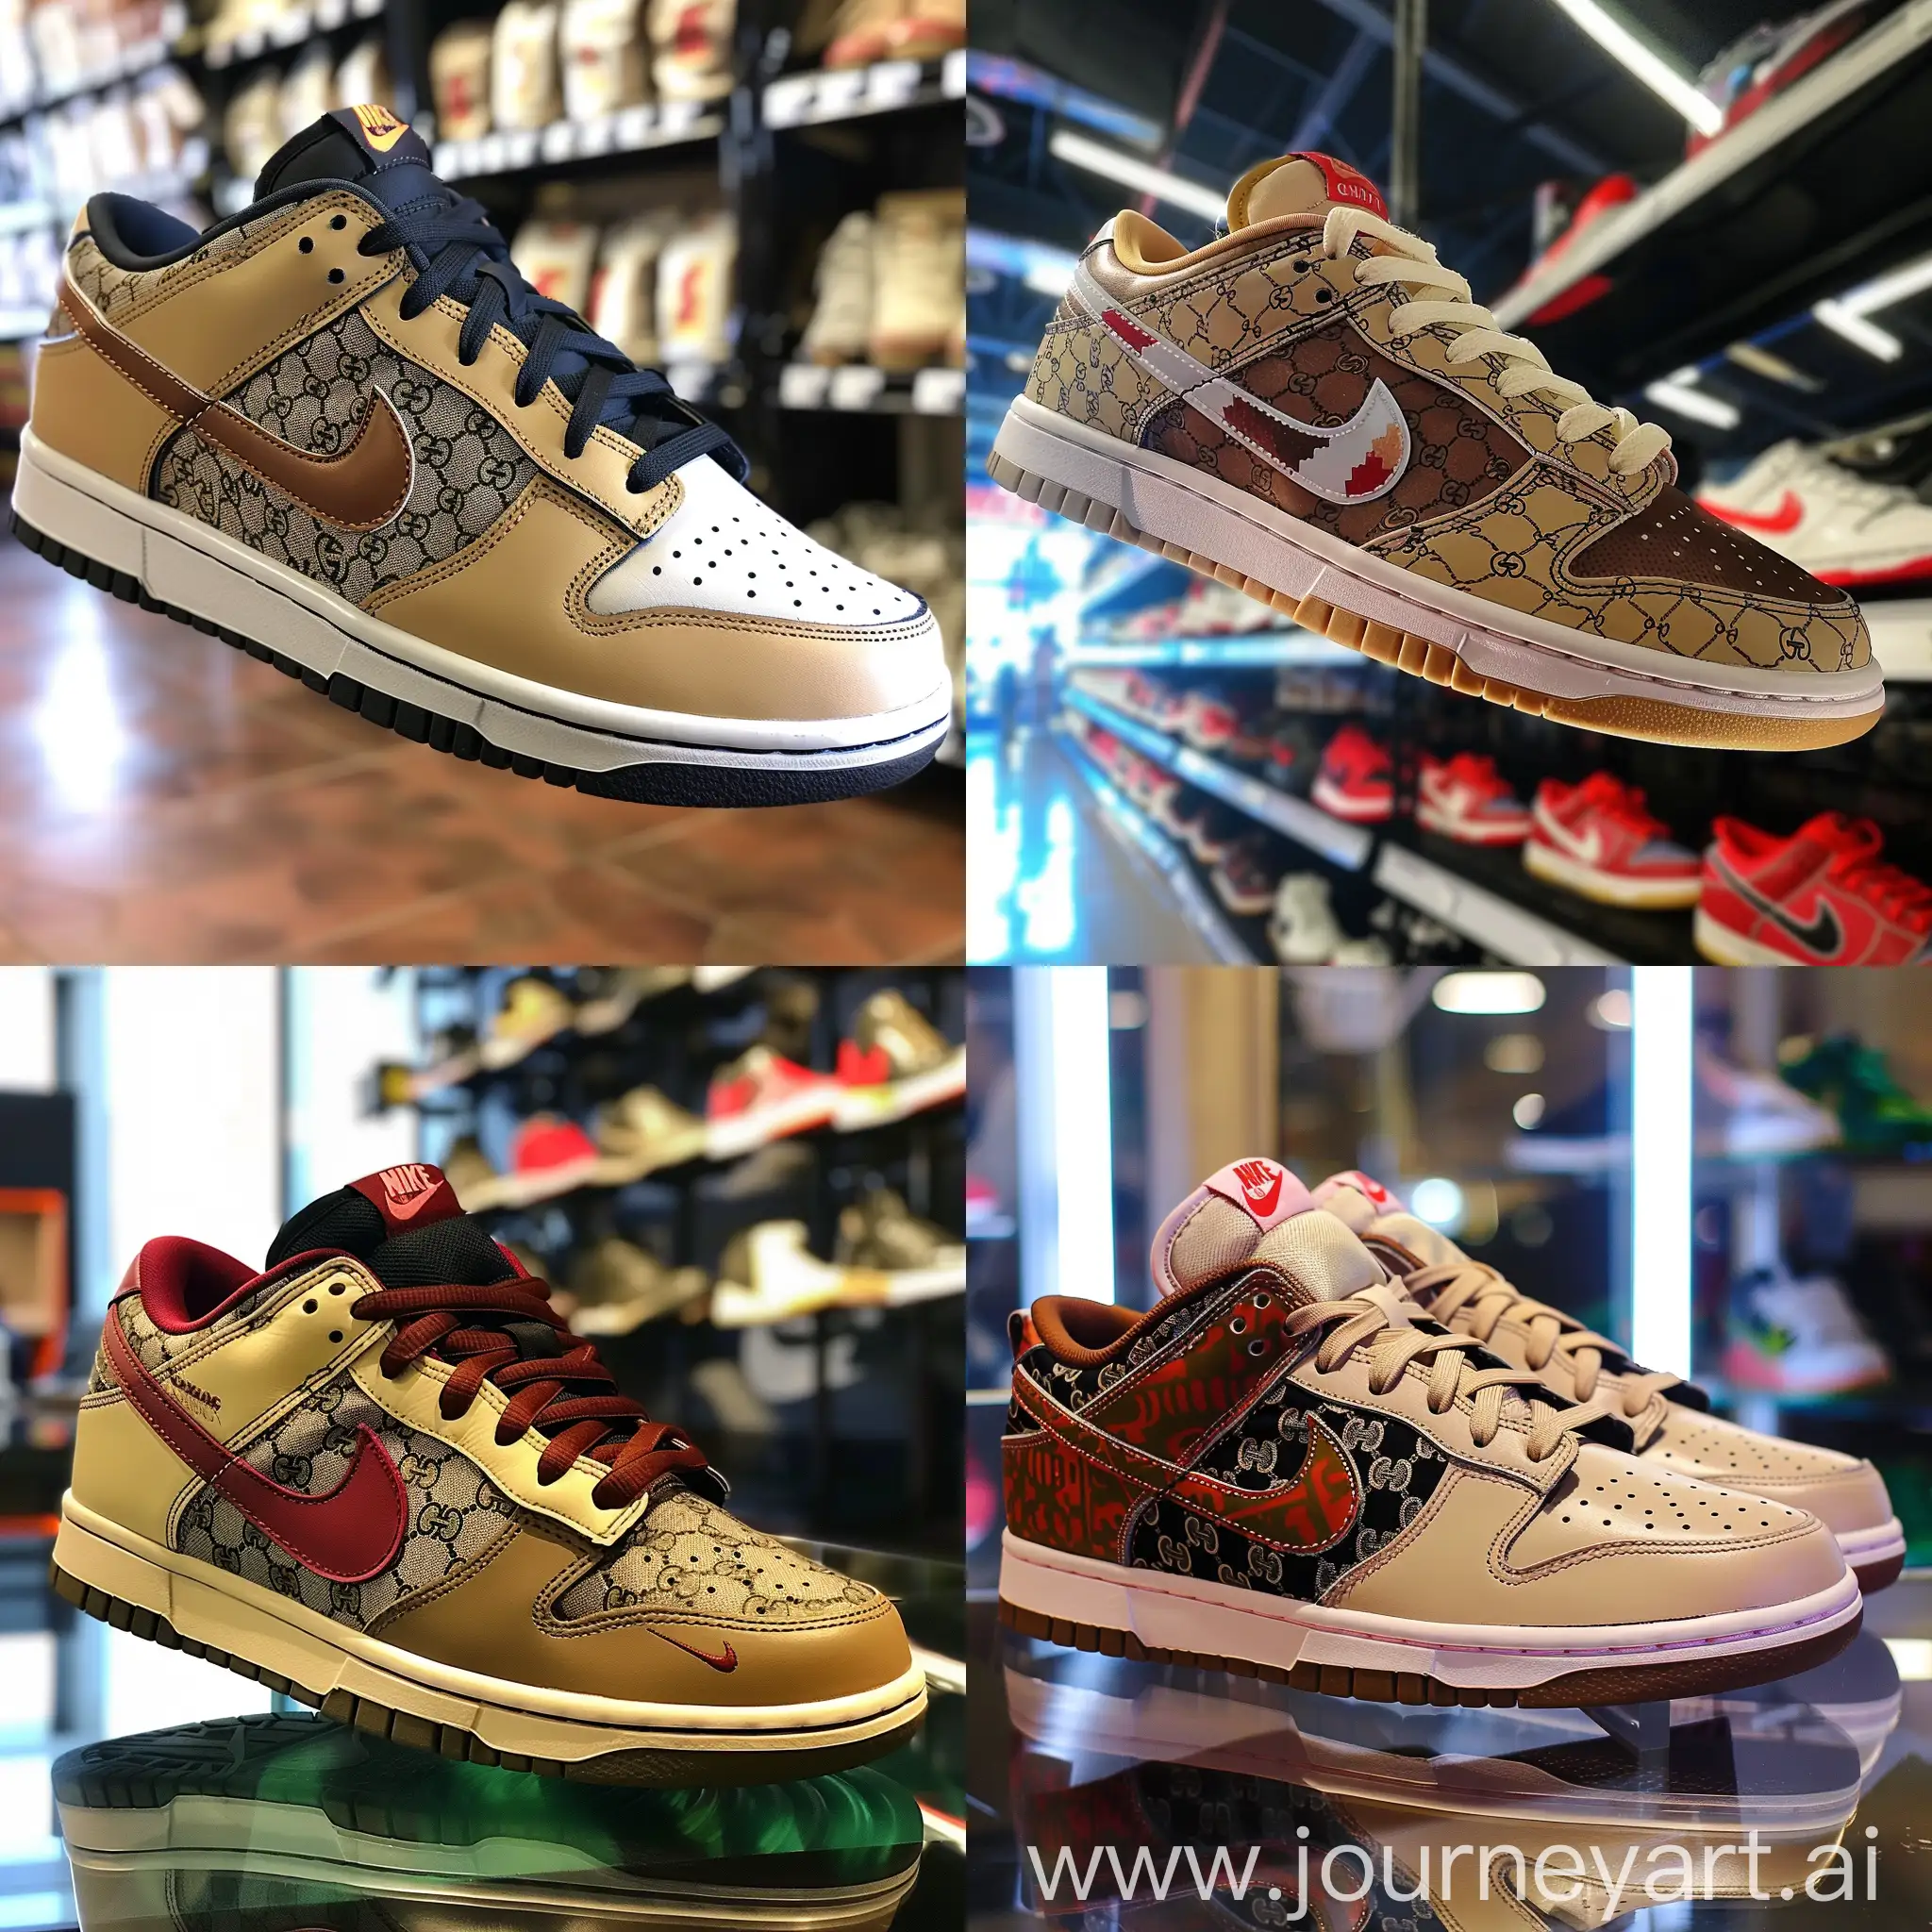 Nike-Dunk-Shoes-in-Gucci-Design-on-Display-in-Realistic-Shop-Setting